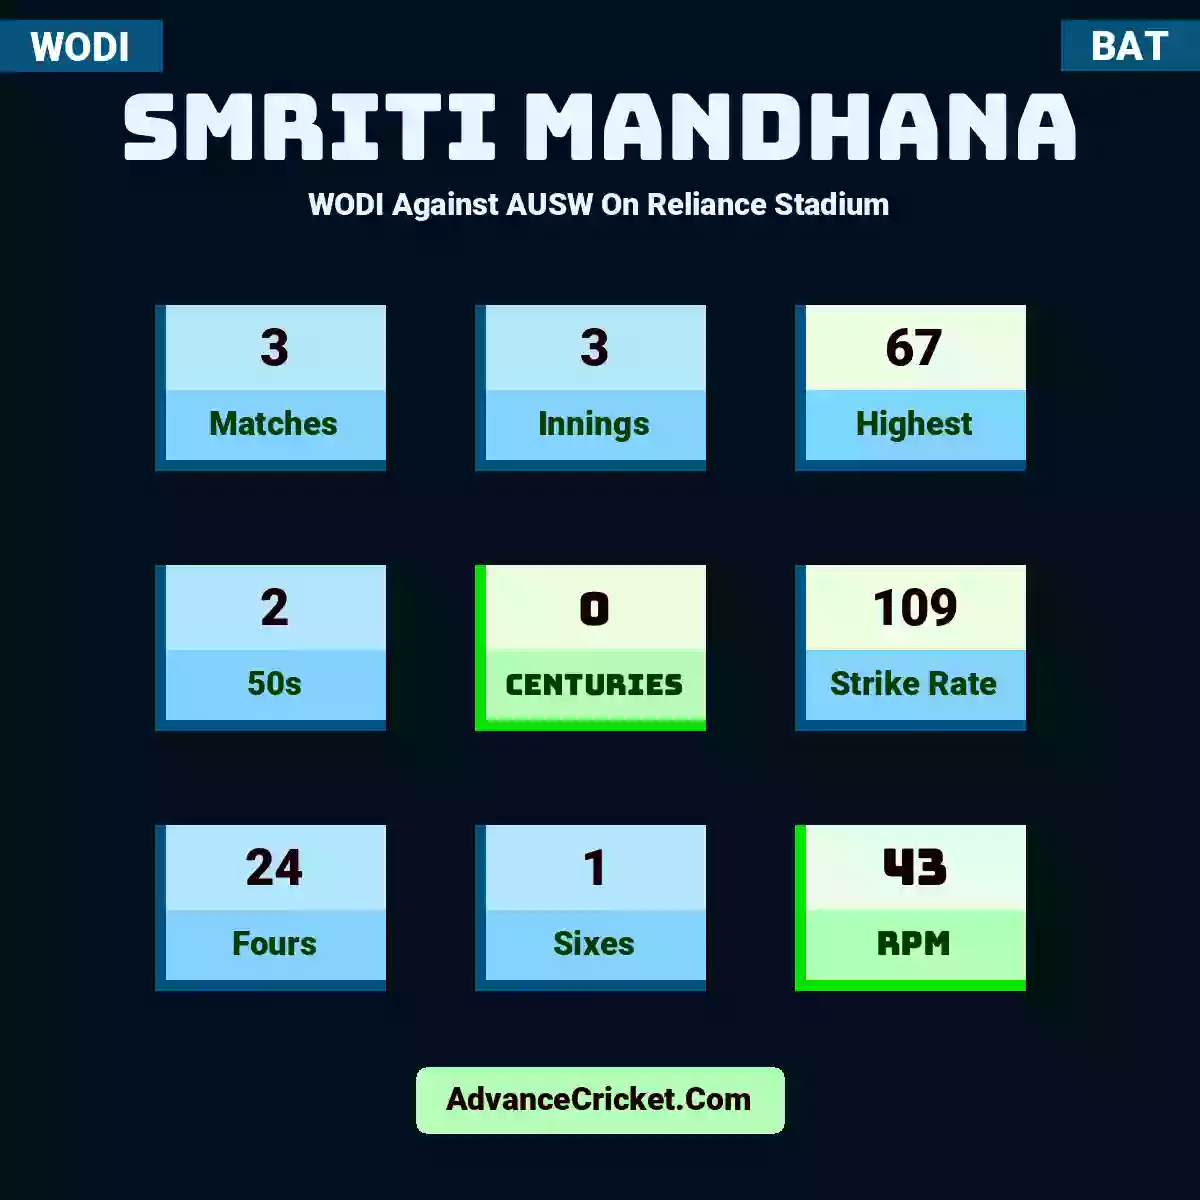 Smriti Mandhana WODI  Against AUSW On Reliance Stadium, Smriti Mandhana played 3 matches, scored 67 runs as highest, 2 half-centuries, and 0 centuries, with a strike rate of 109. S.Mandhana hit 24 fours and 1 sixes, with an RPM of 43.